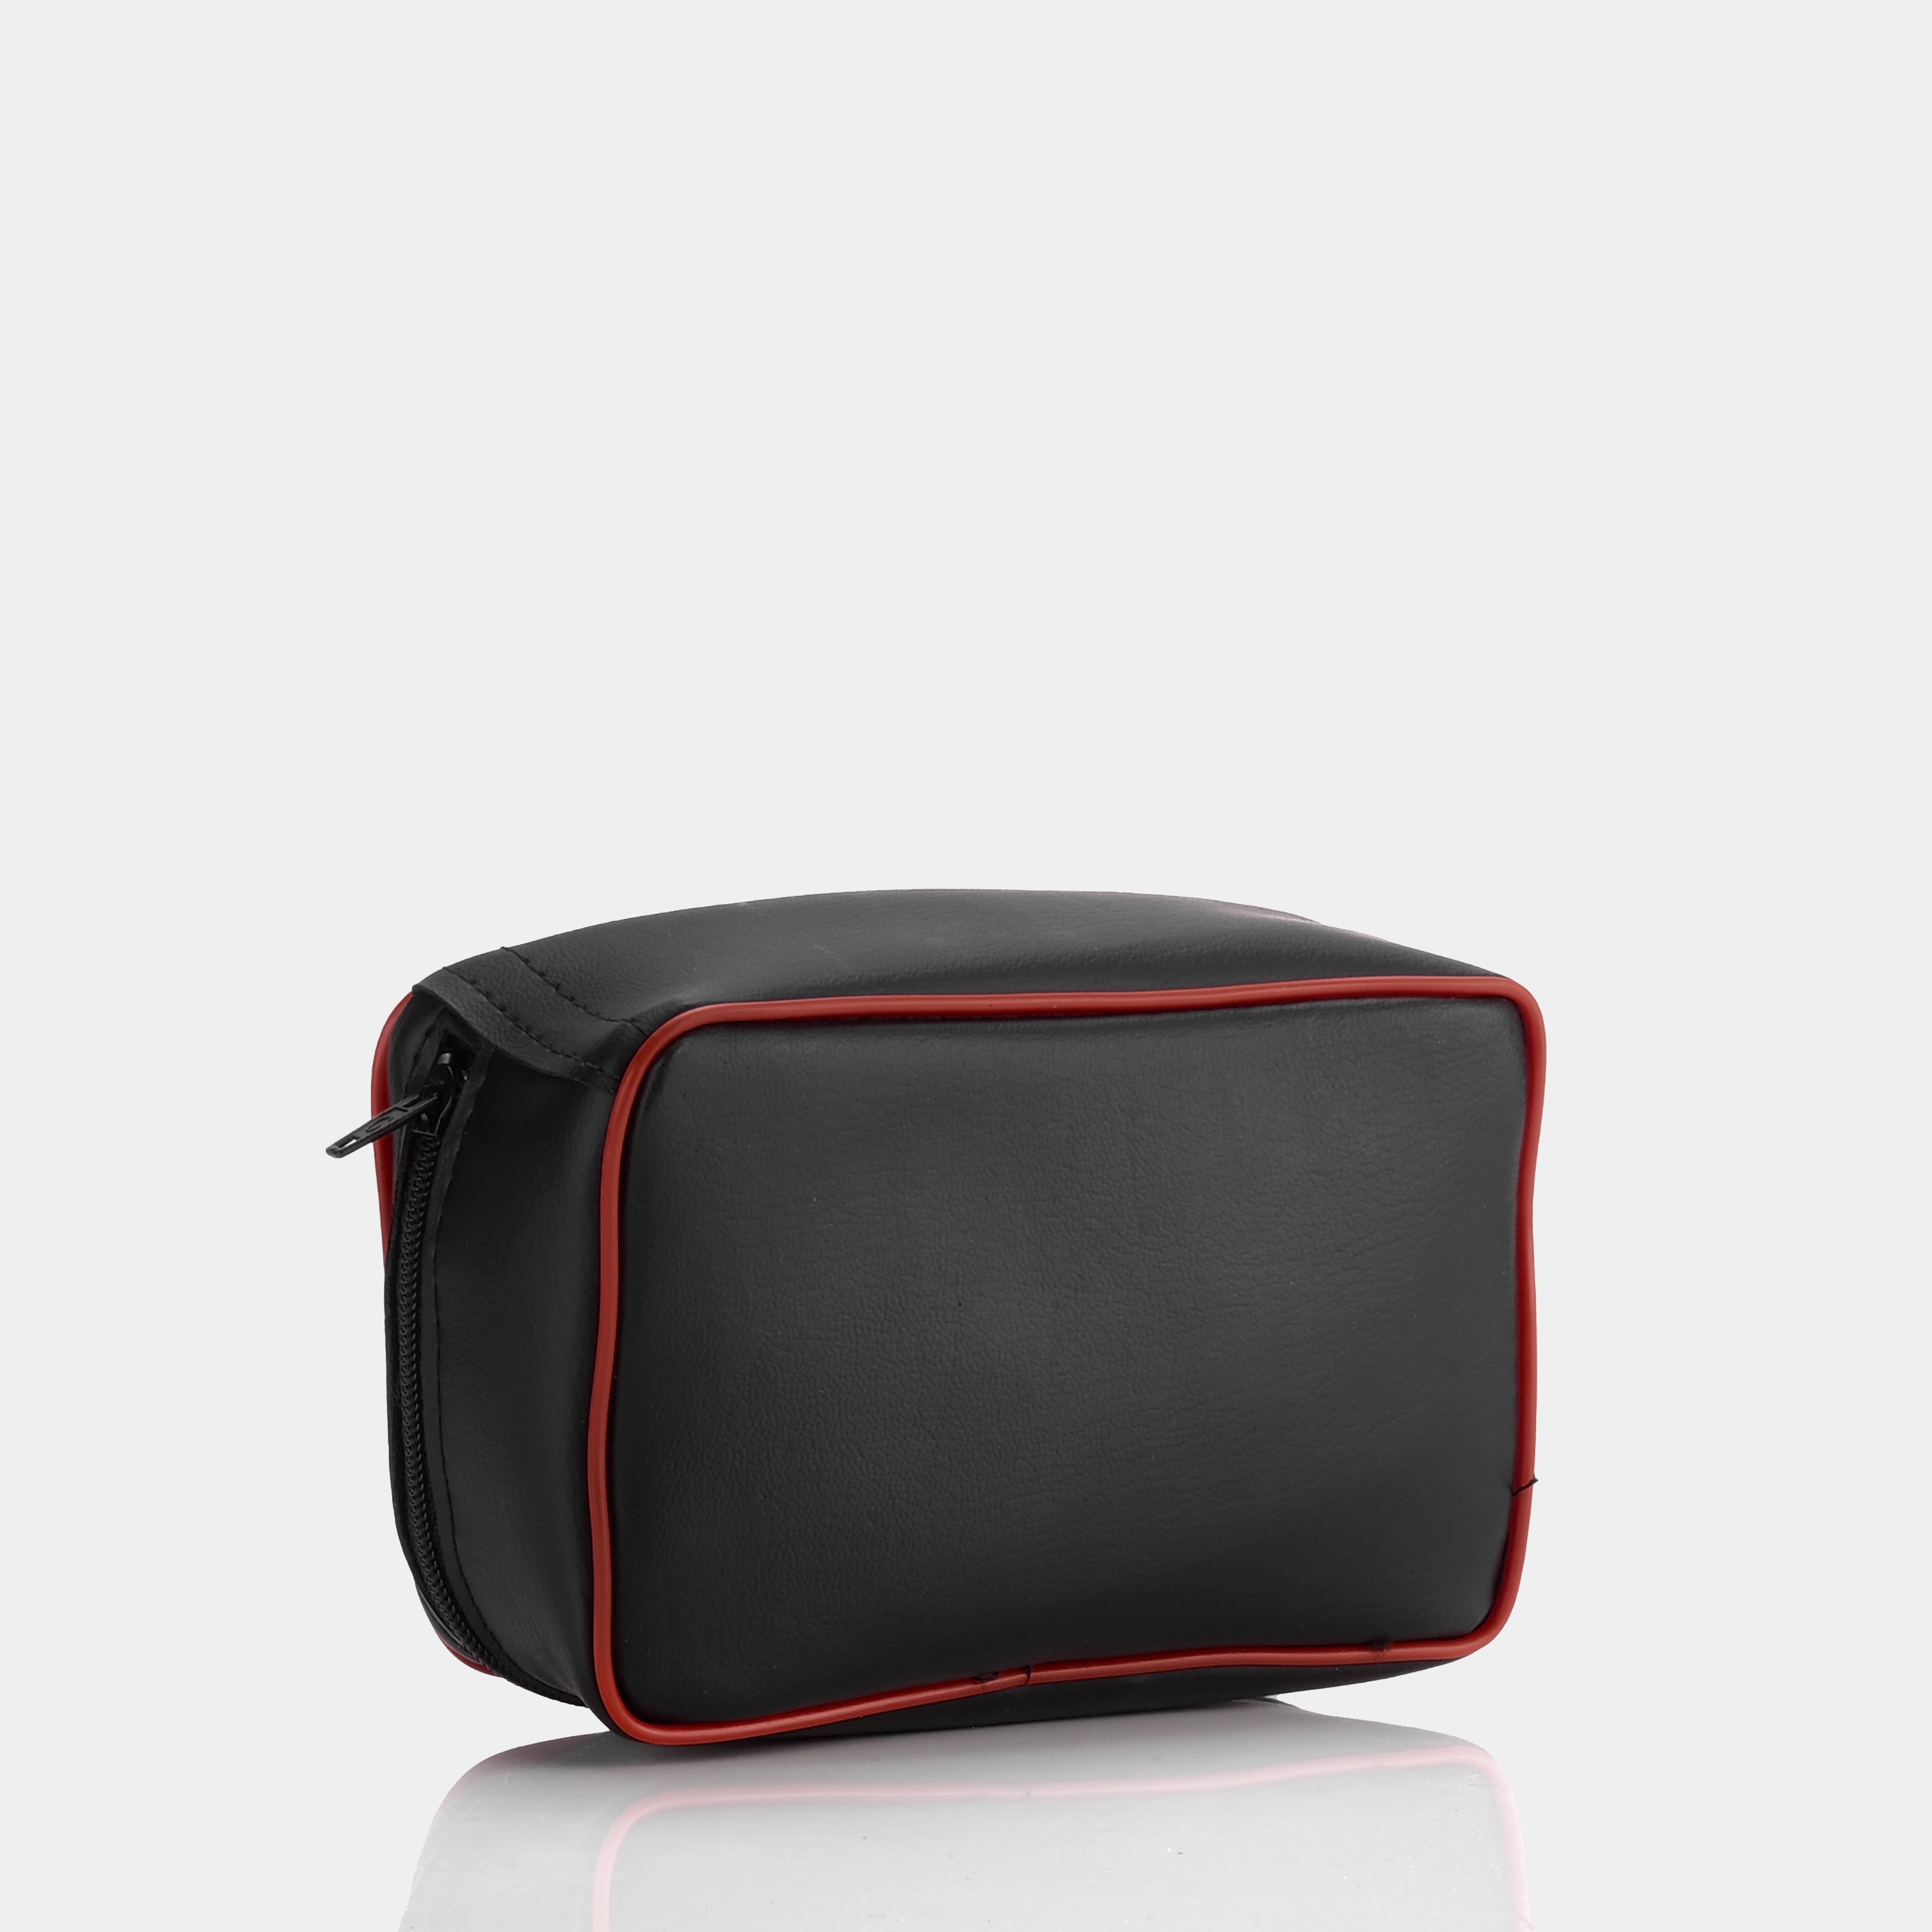 Photoflex Black & Red Faux Leather Point And Shoot Camera Case